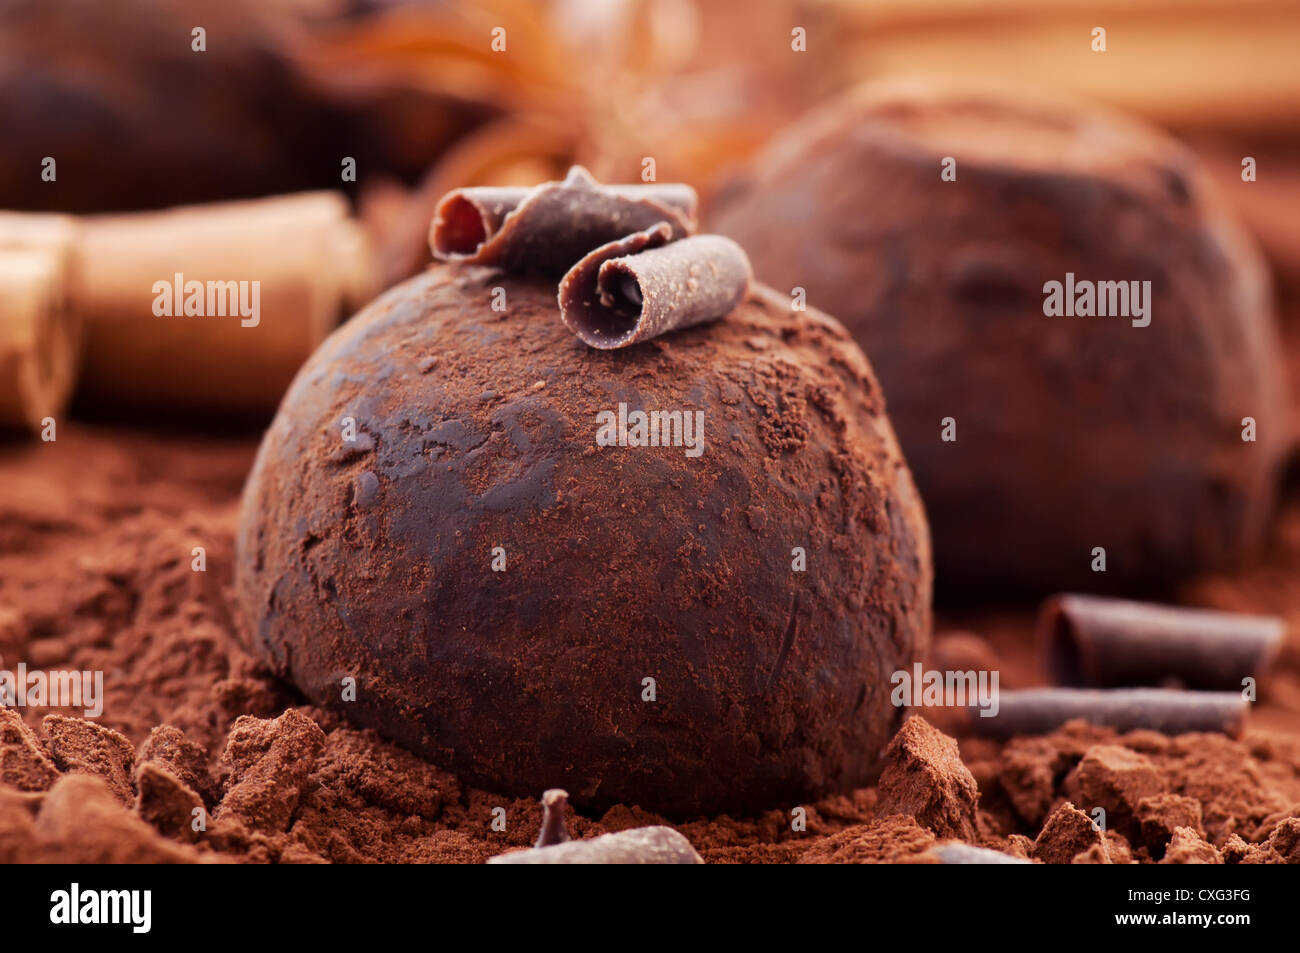 Sweet chocolate truffle with cinnamon stick as closeup on cocoa powder background Stock Photo